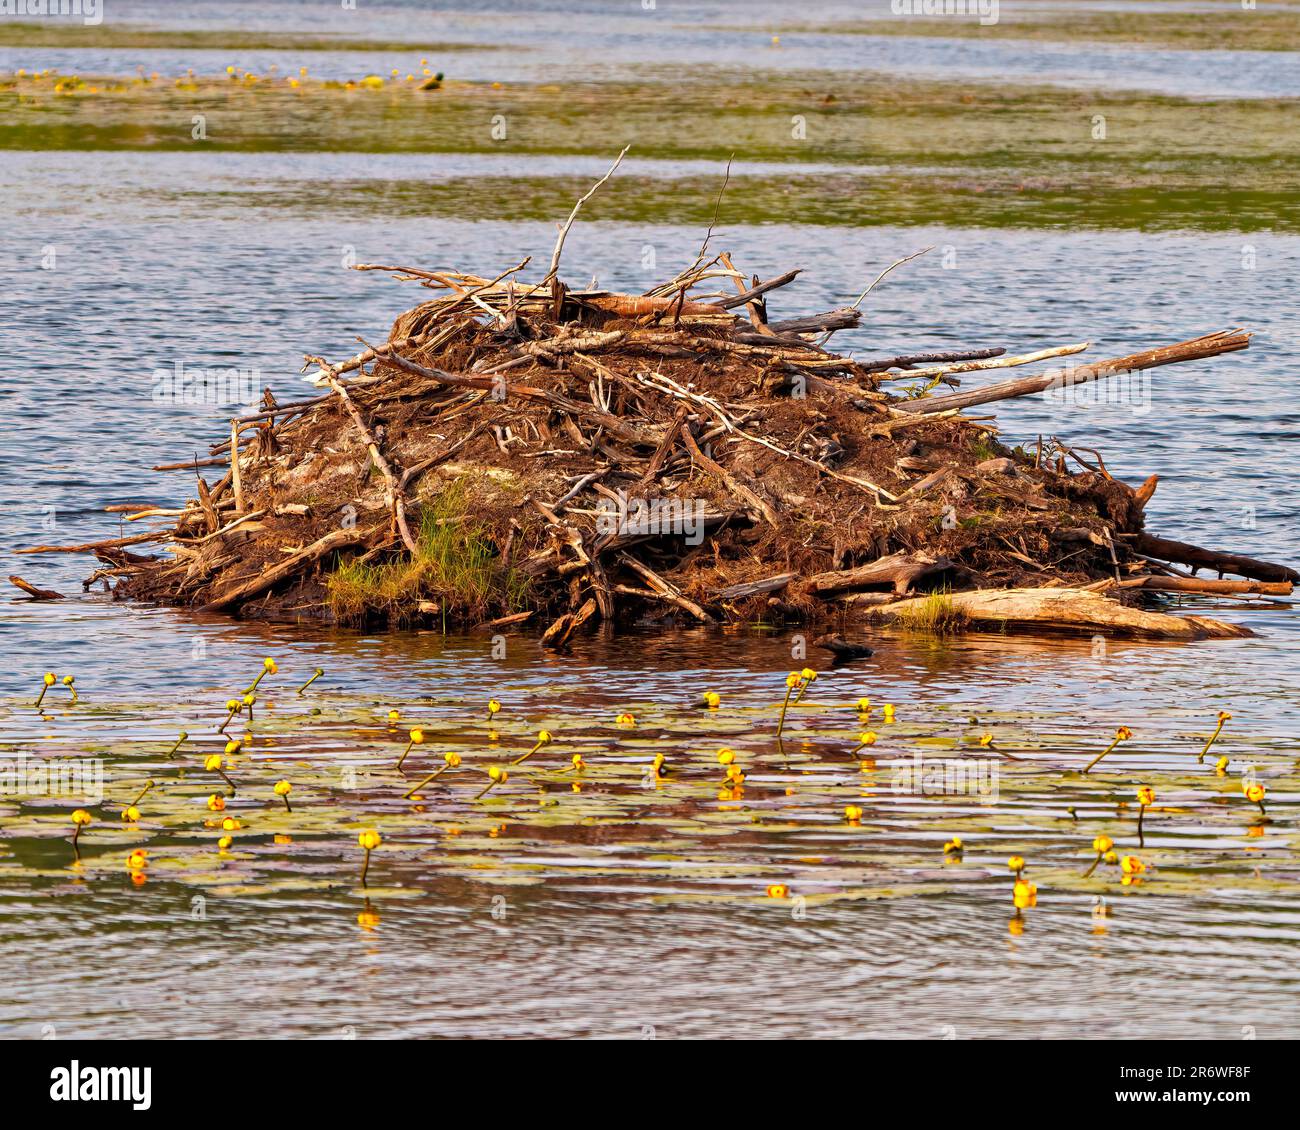 Beaver lodge in a marsh environment in the summer time. with lily pads in the water. Beaver construction. Beaver skills. Stock Photo